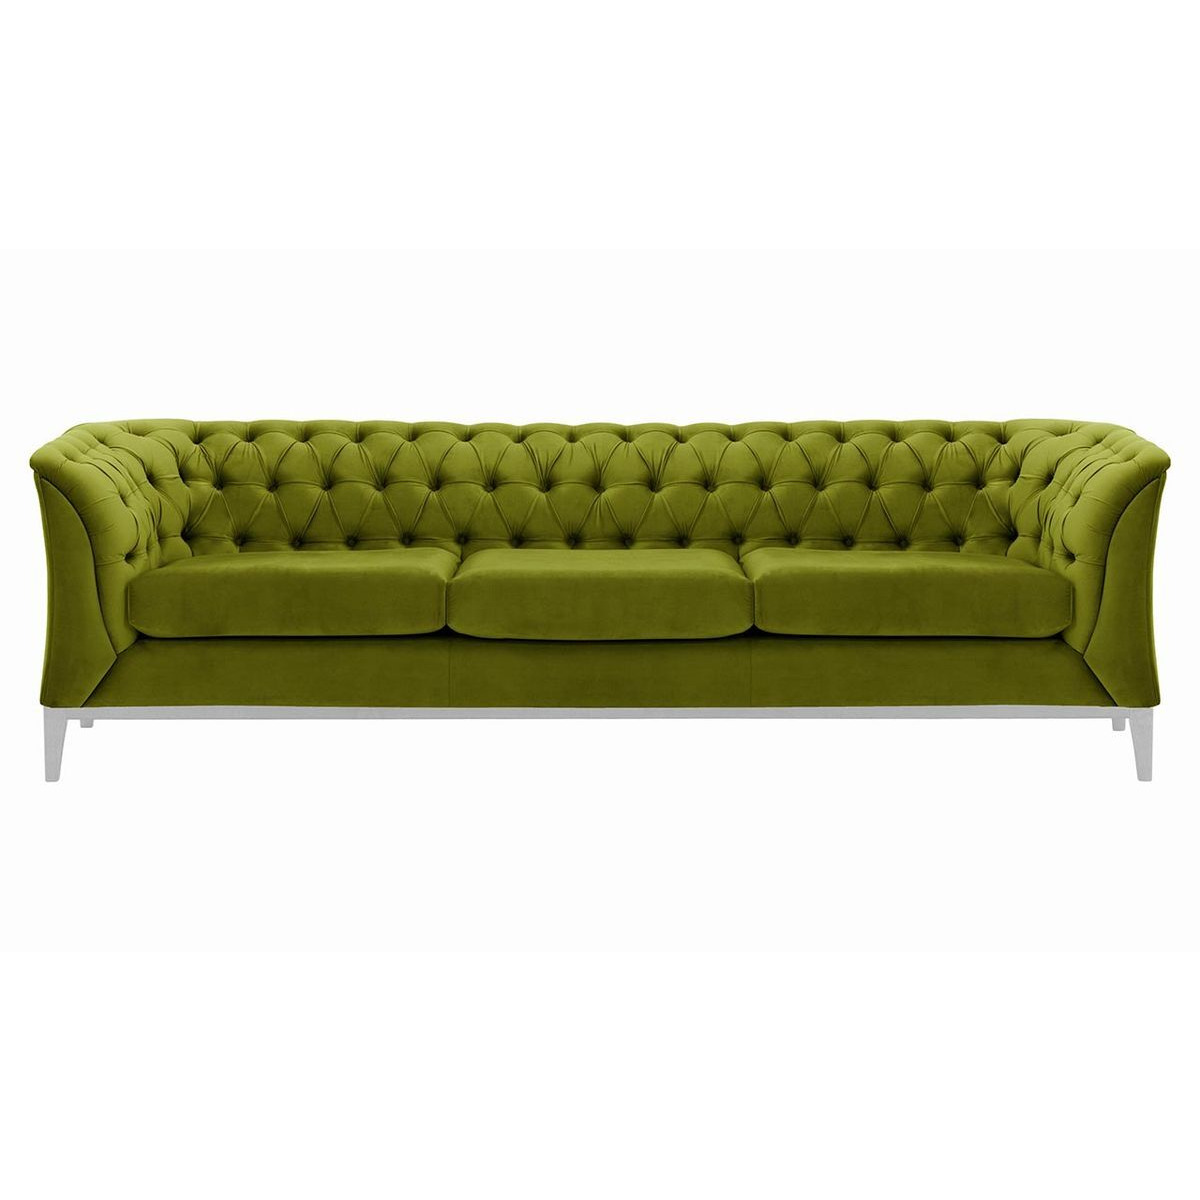 Chesterfield Modern 3 Seater Sofa Wood, olive green, Leg colour: white - image 1